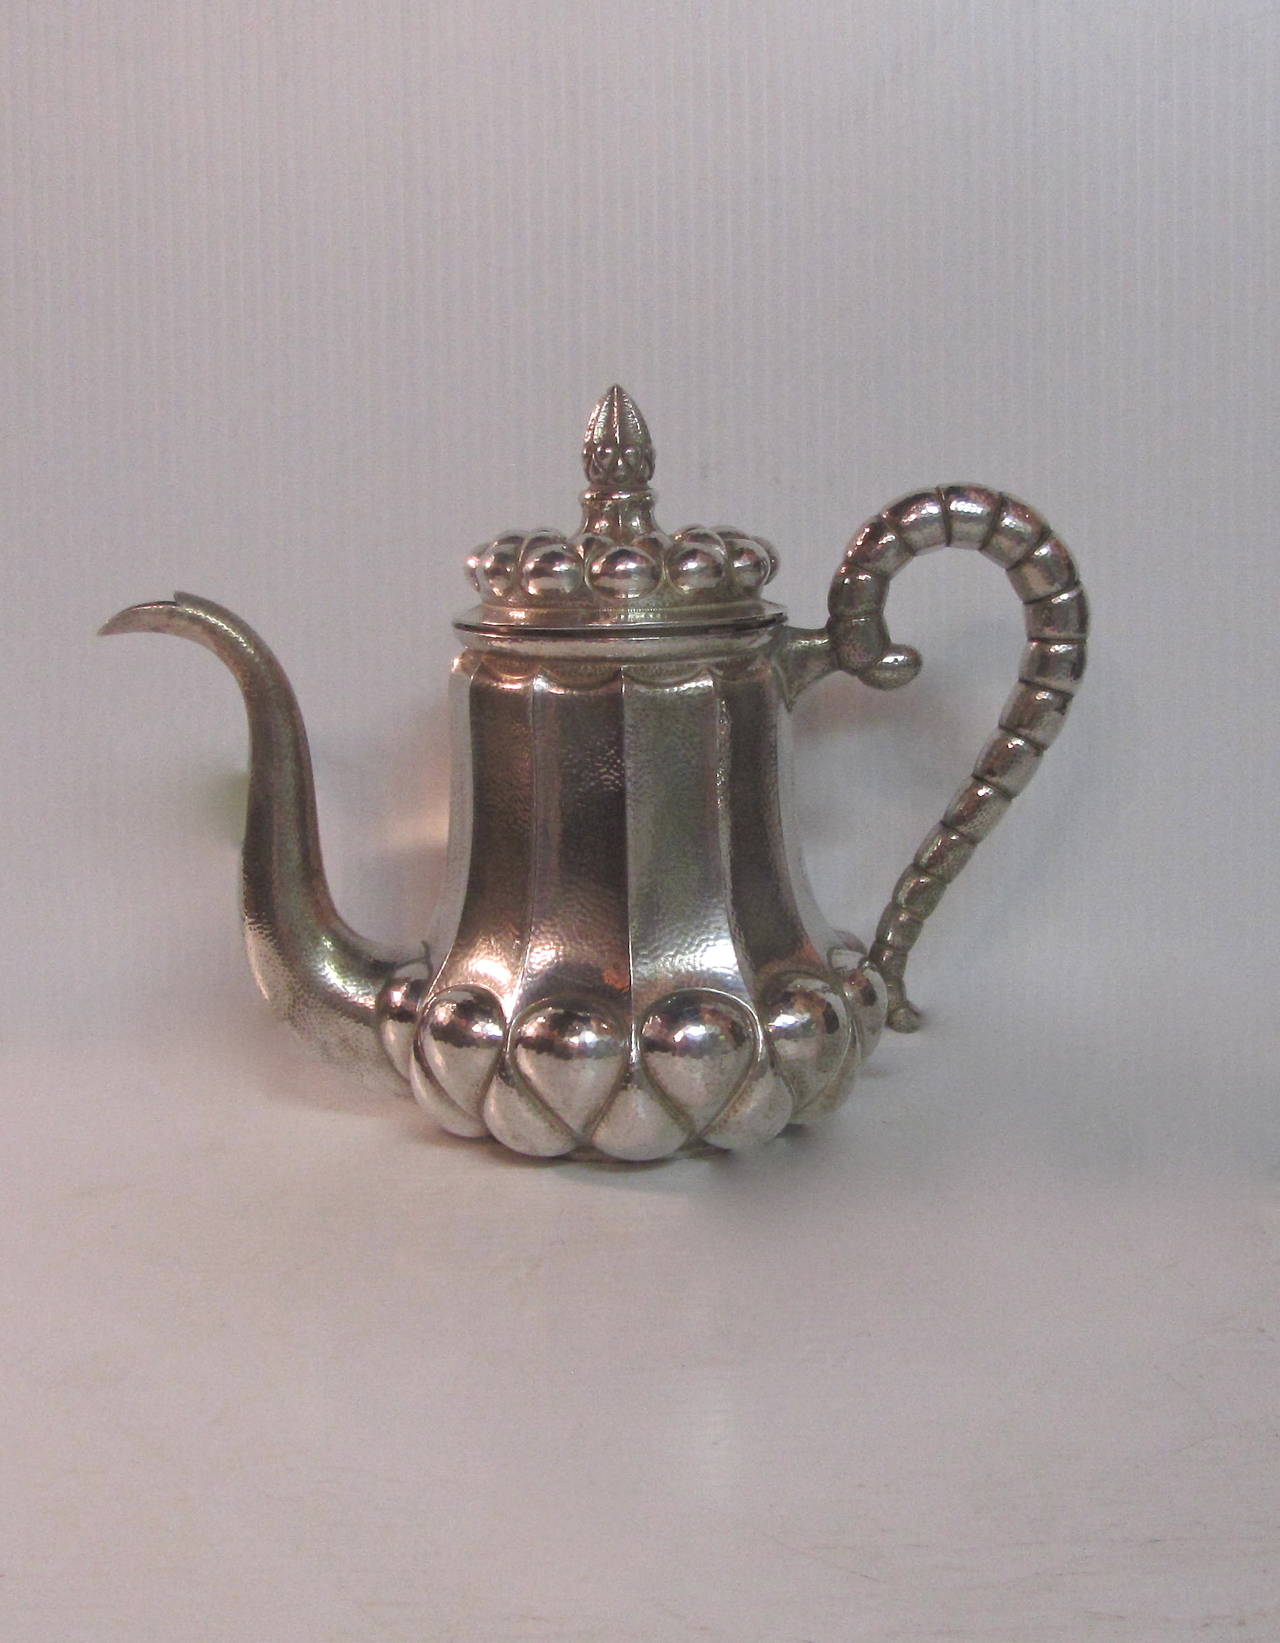 Tea and coffee silver service,
Hungary, 1937-1965.
Comprising a coffee pot, teapot, milk jug, sugar bowl, cream jug and a tray.
Each piece is marked with Diana head mark and silver standard mark 3 (silver purity 3 = .800), 